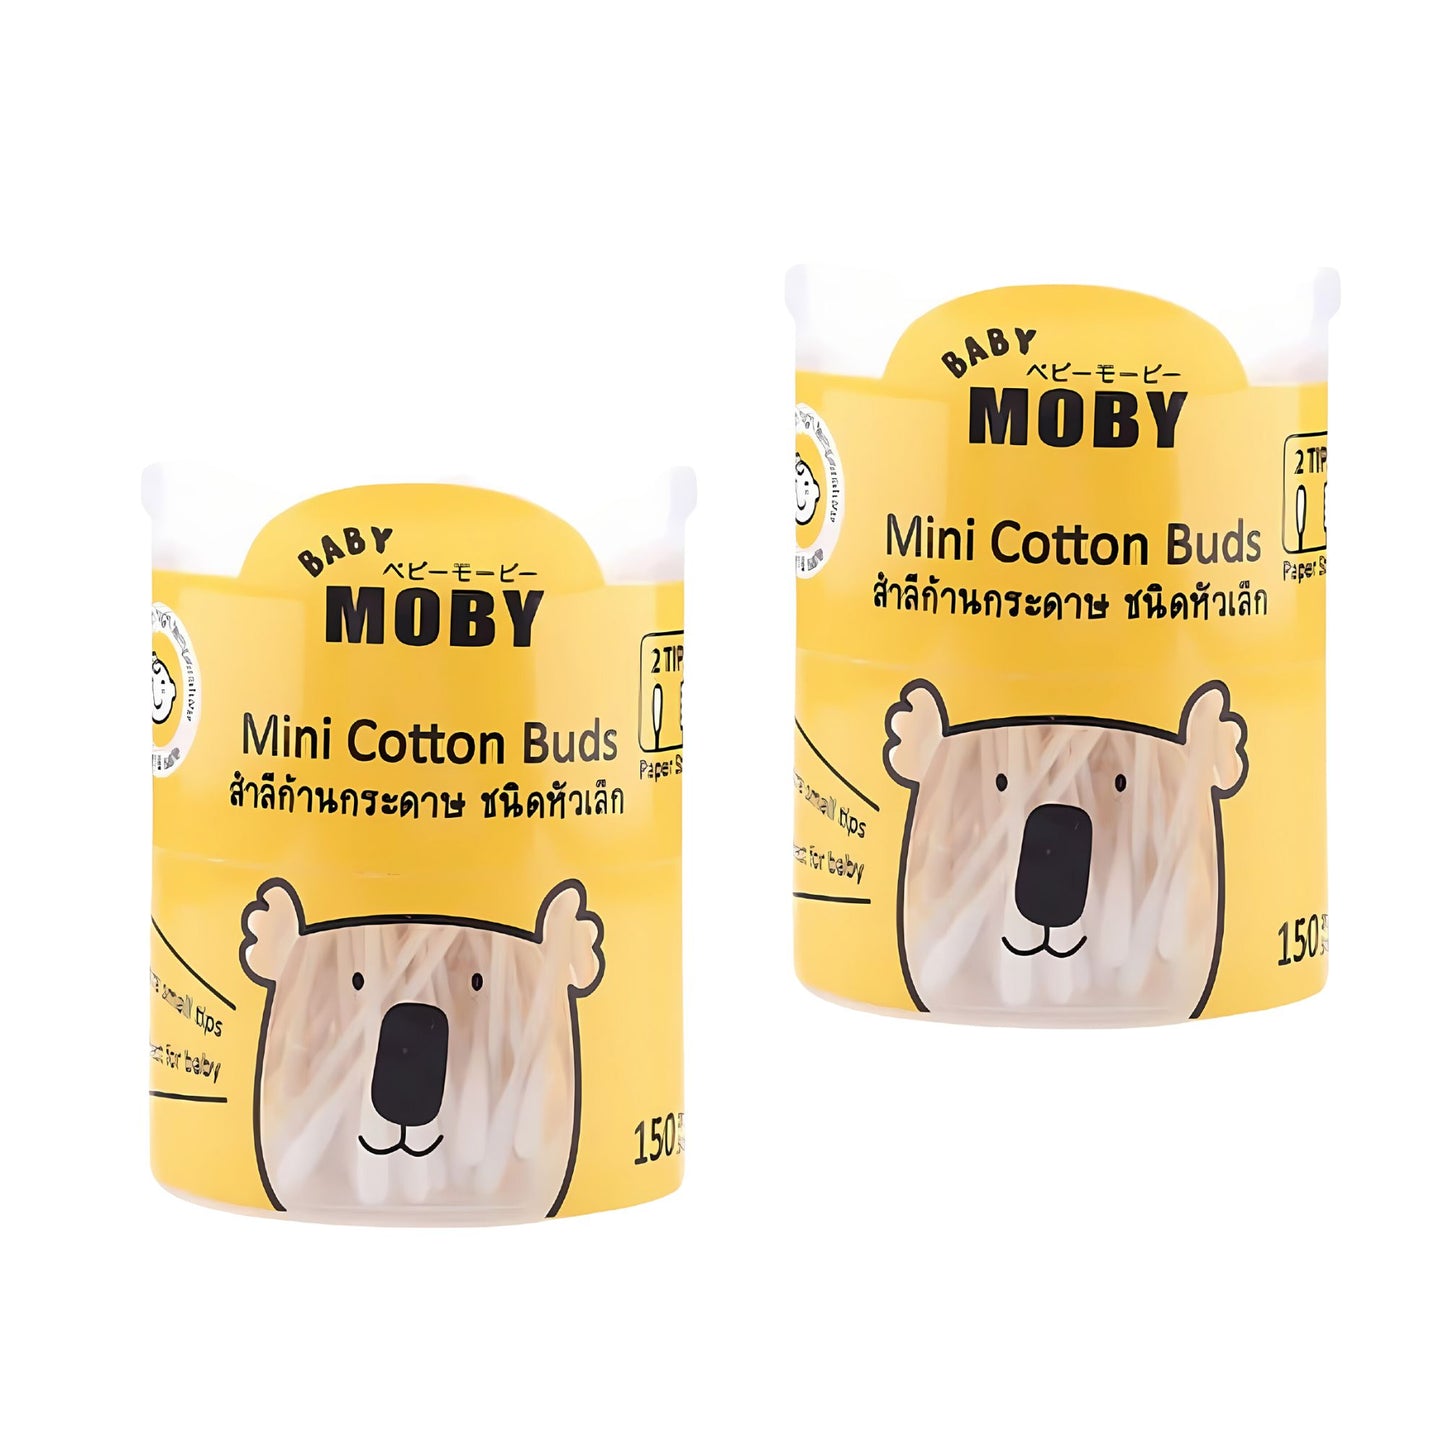 Baby Moby MINI Cotton Buds Bundle of 2